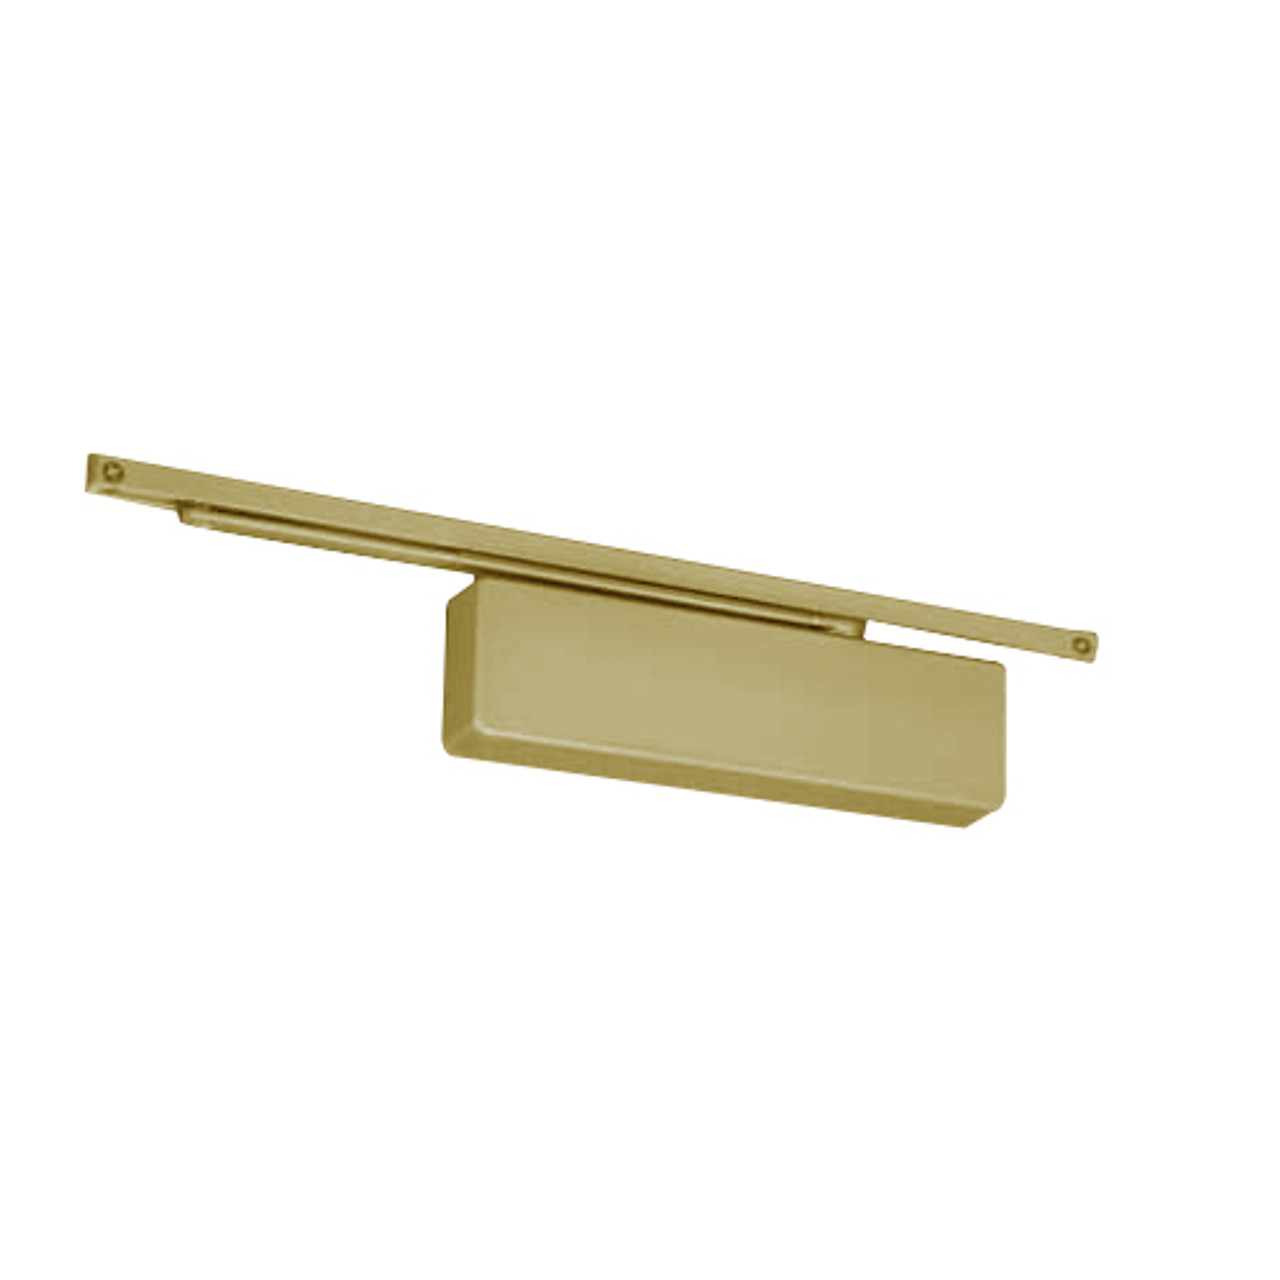 7540STH-696 Norton 7500 Series Hold Open Institutional Door Closer with Pull Side Low Profile Slide Track in Gold Finish